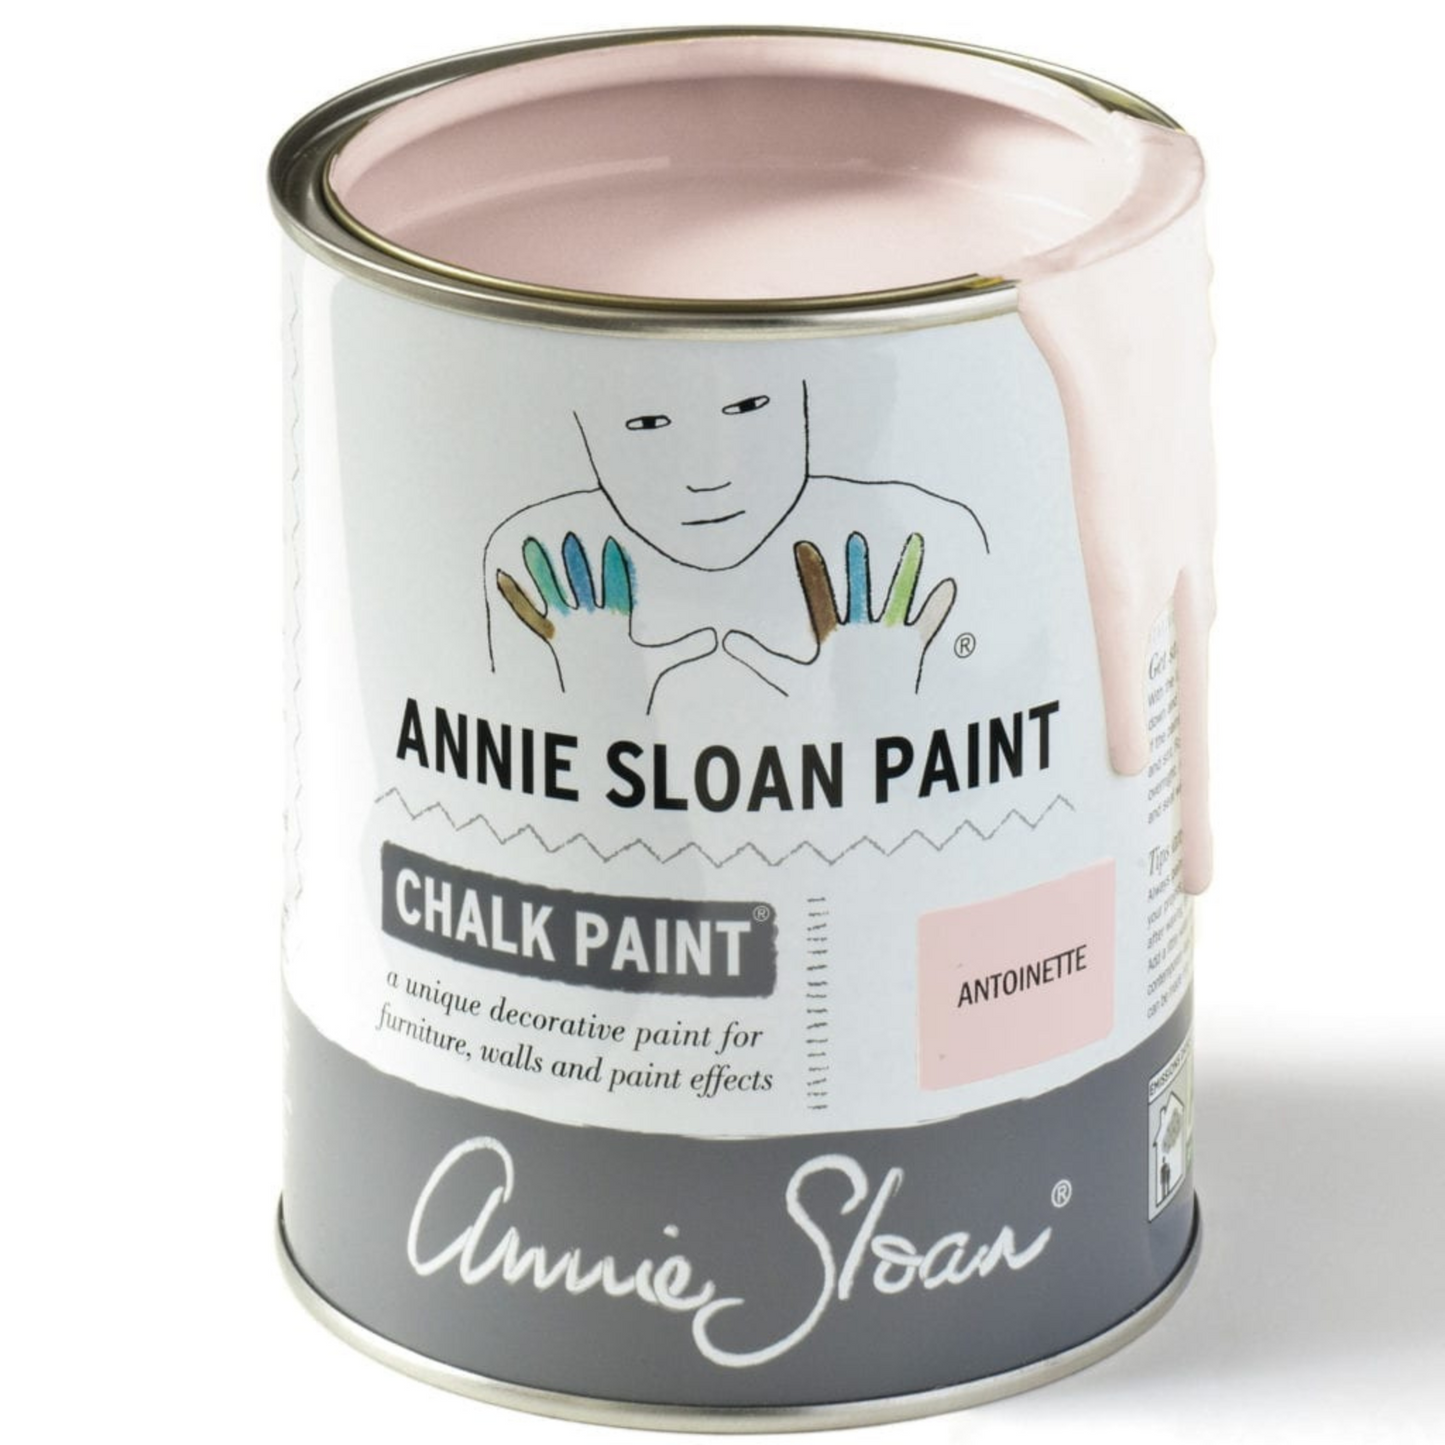 Can of Antoinette annie sloan chalk paint.